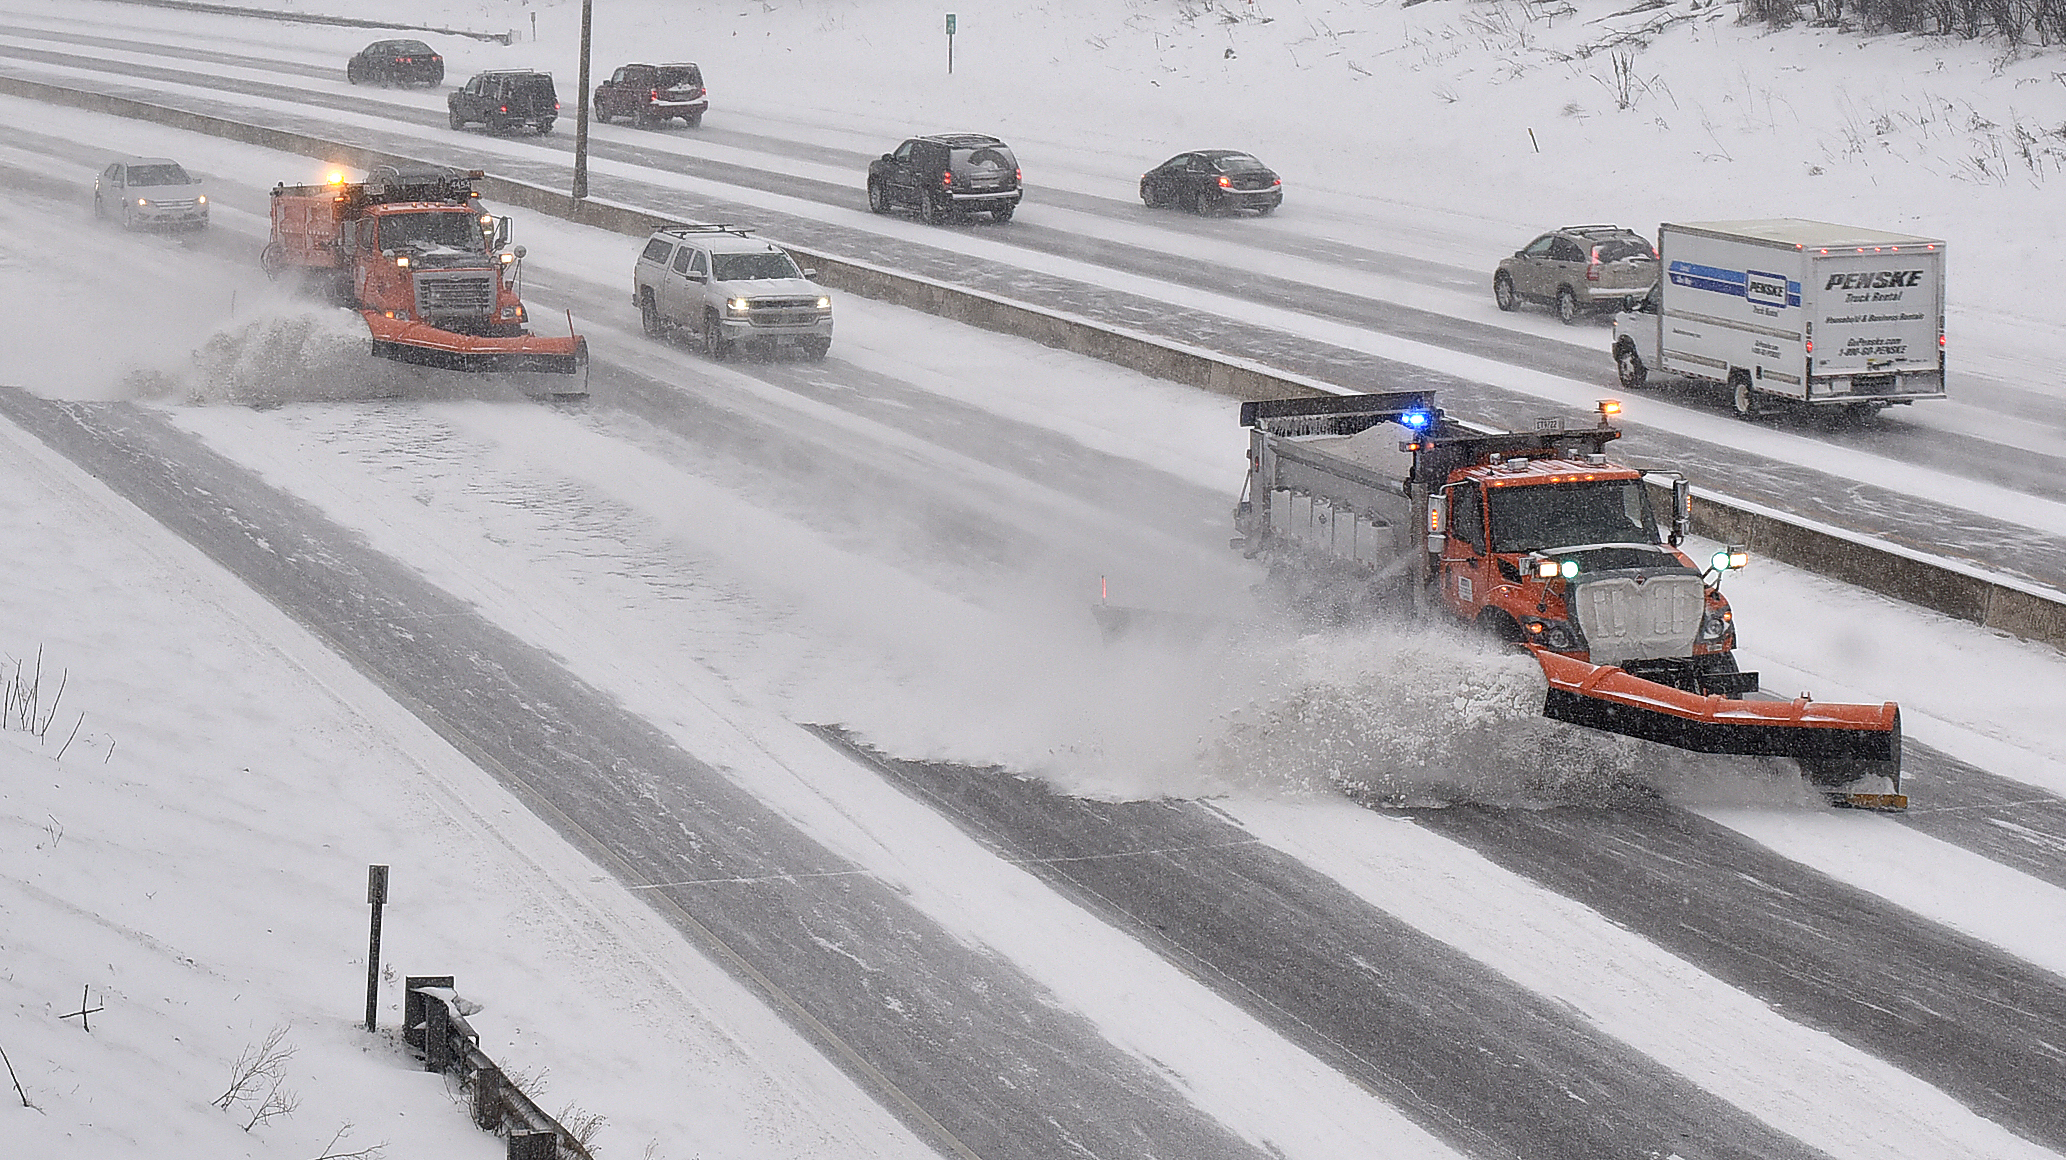 Photo: snowplows plowing snow on a highway